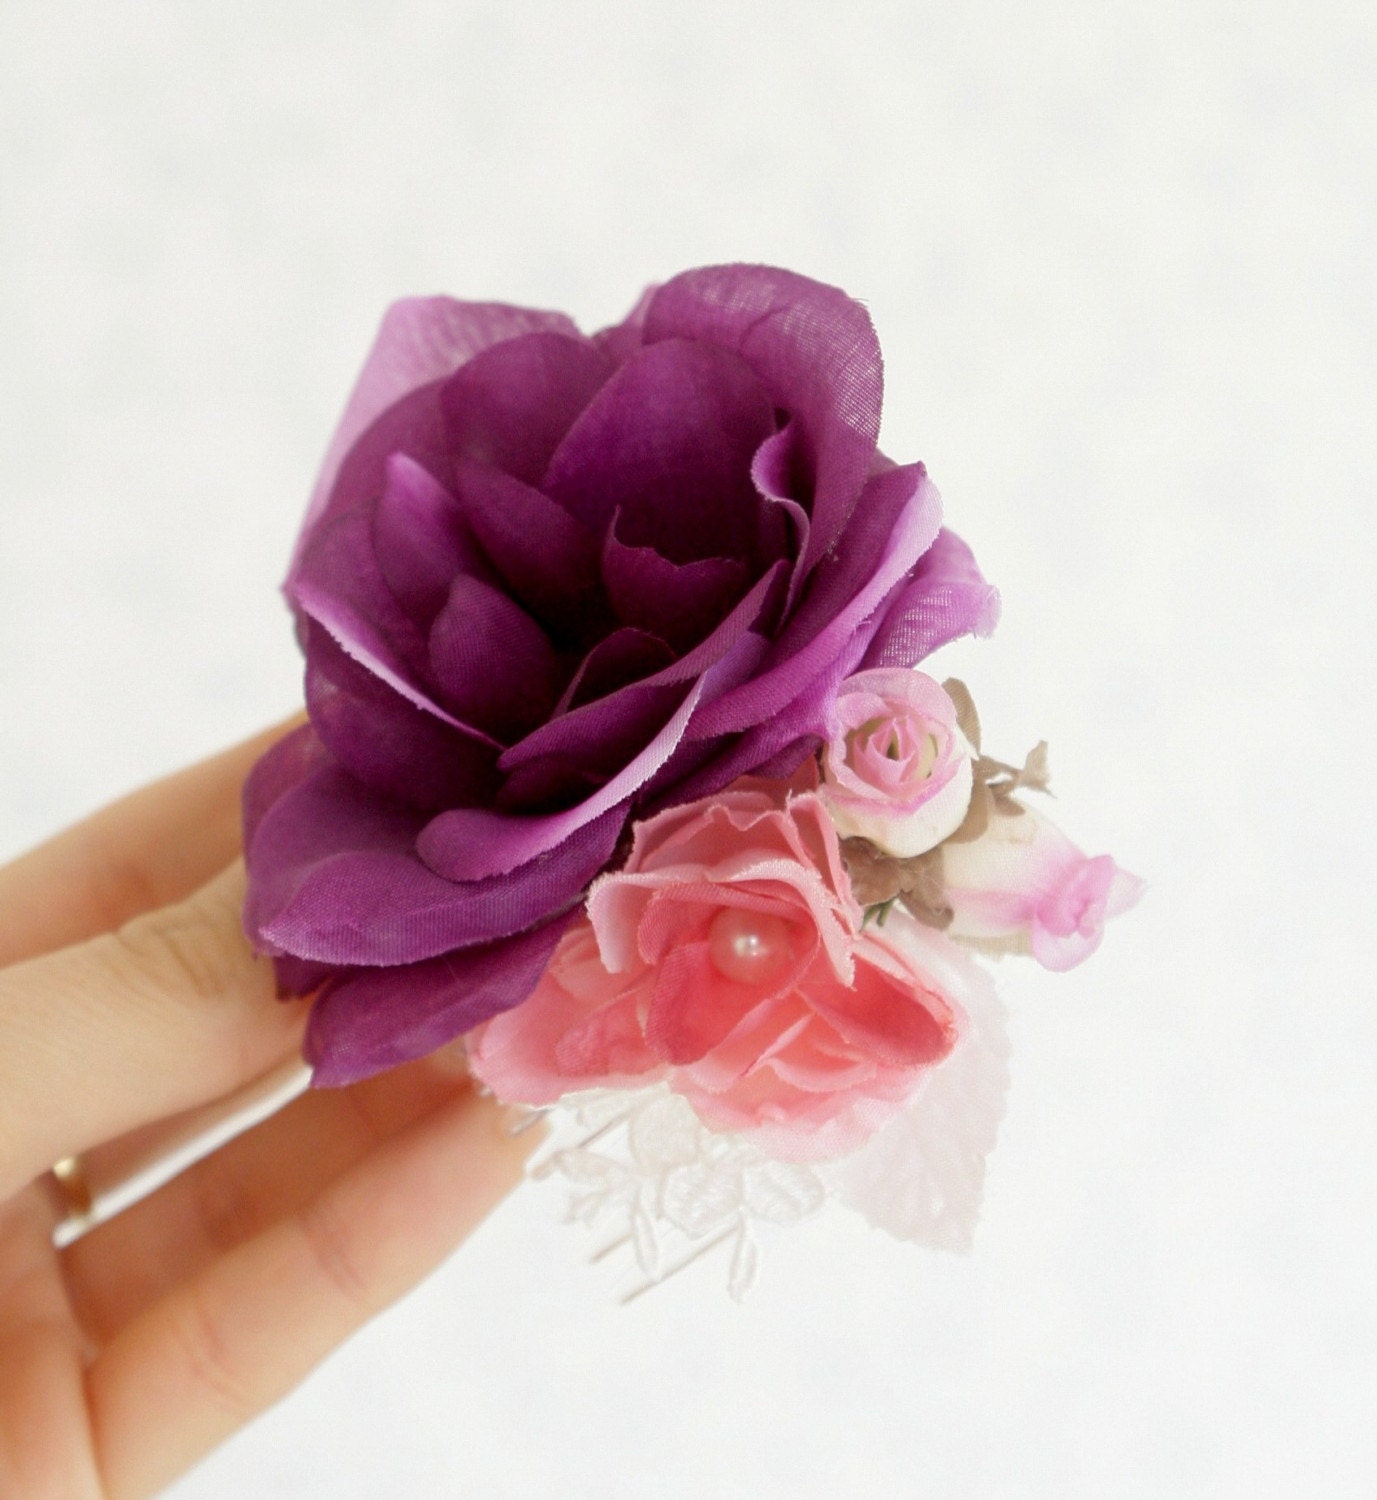 Buy 1 Get 1 SALE -Purple  touch - floral hair comb